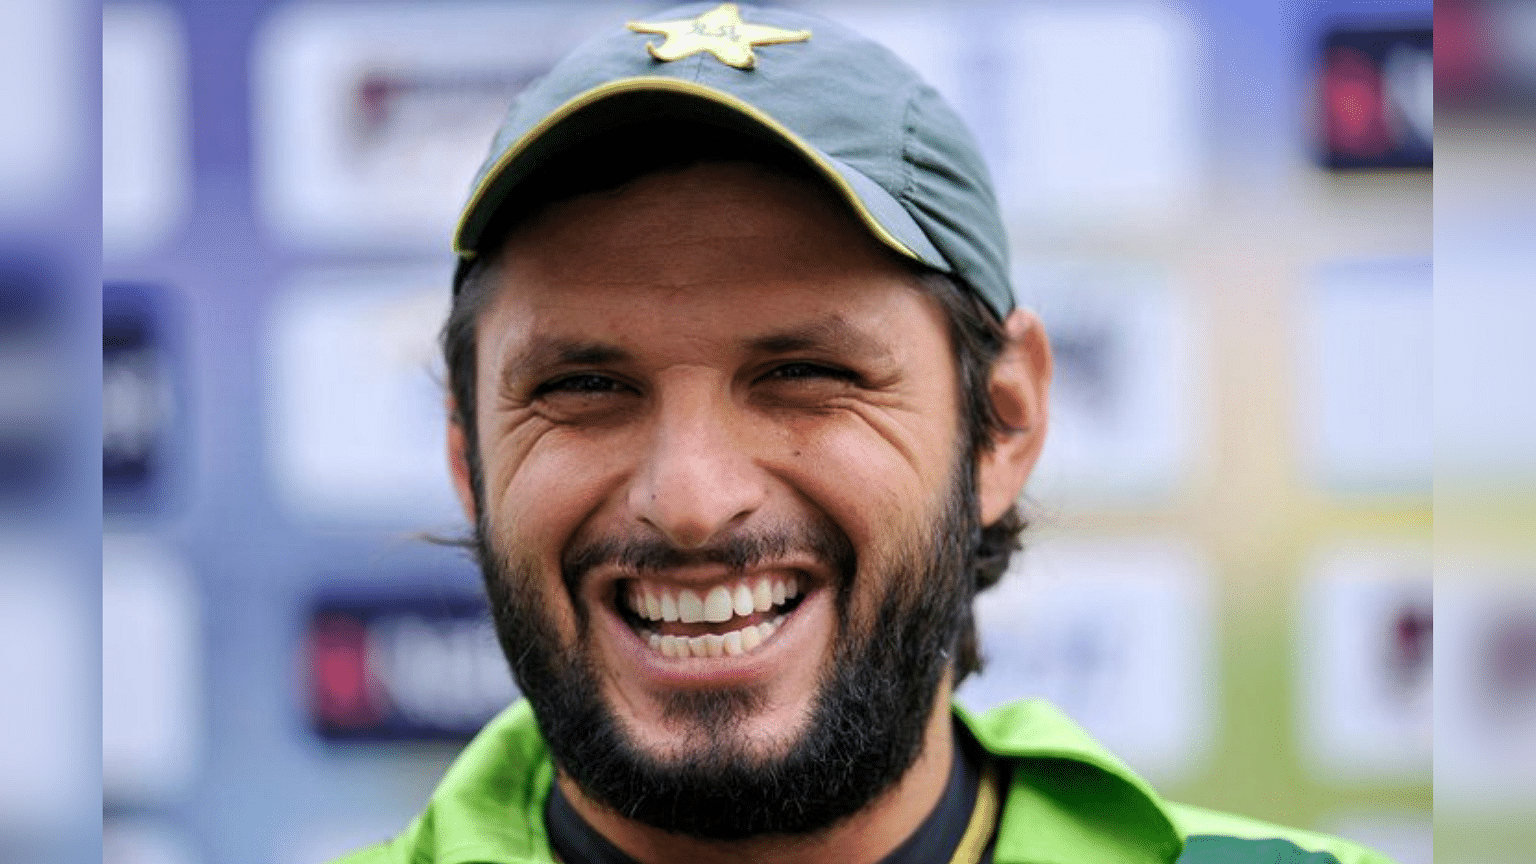 Pakistan’s former captain and star all-rounder Shahid Afridi recently released his autobiography, titled ‘Game Changer’.